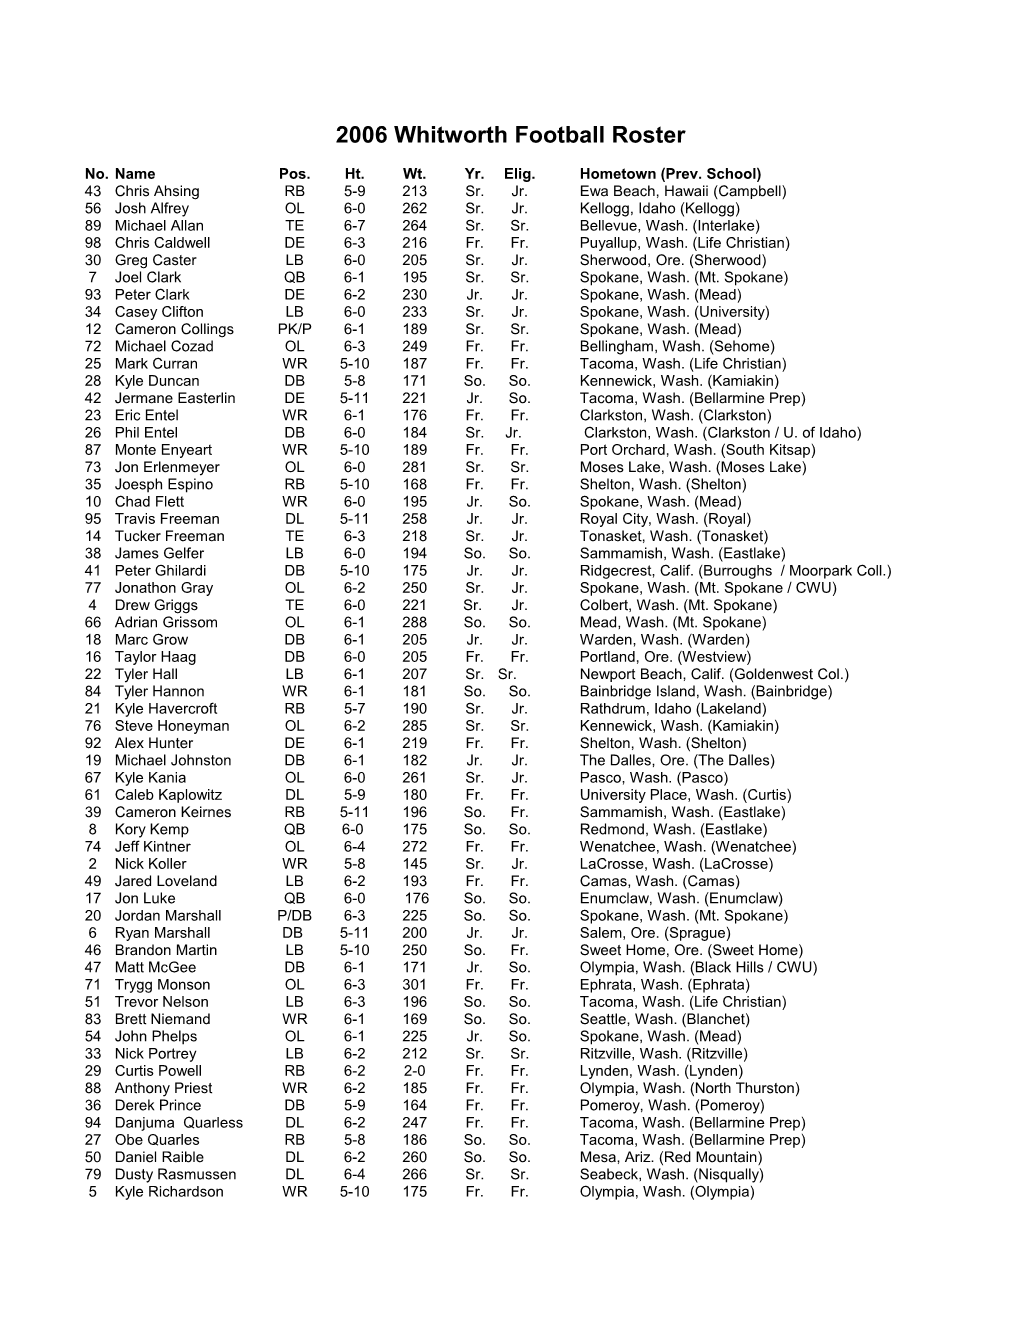 2001 Whitworth Football Roster s1